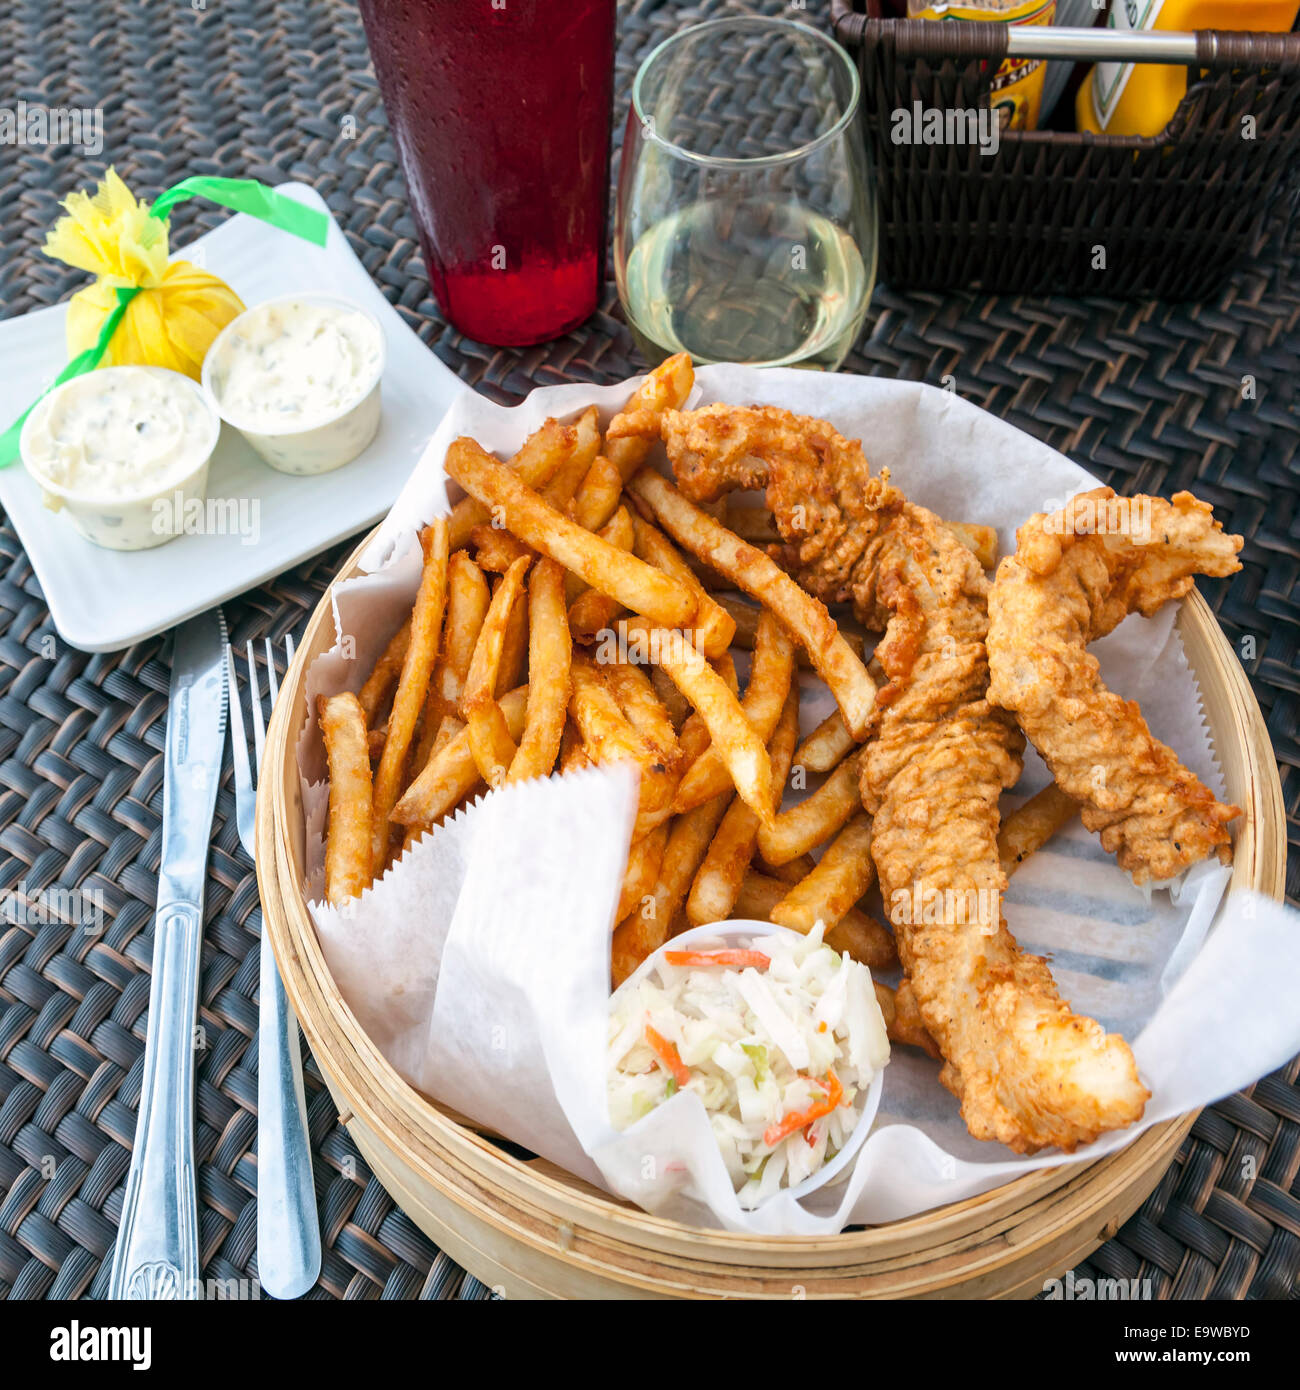 Fish and chips basket with battered flounder, crispy, seasoned french fries, cole slaw, tartar sauce and a glass of white wine. Stock Photo